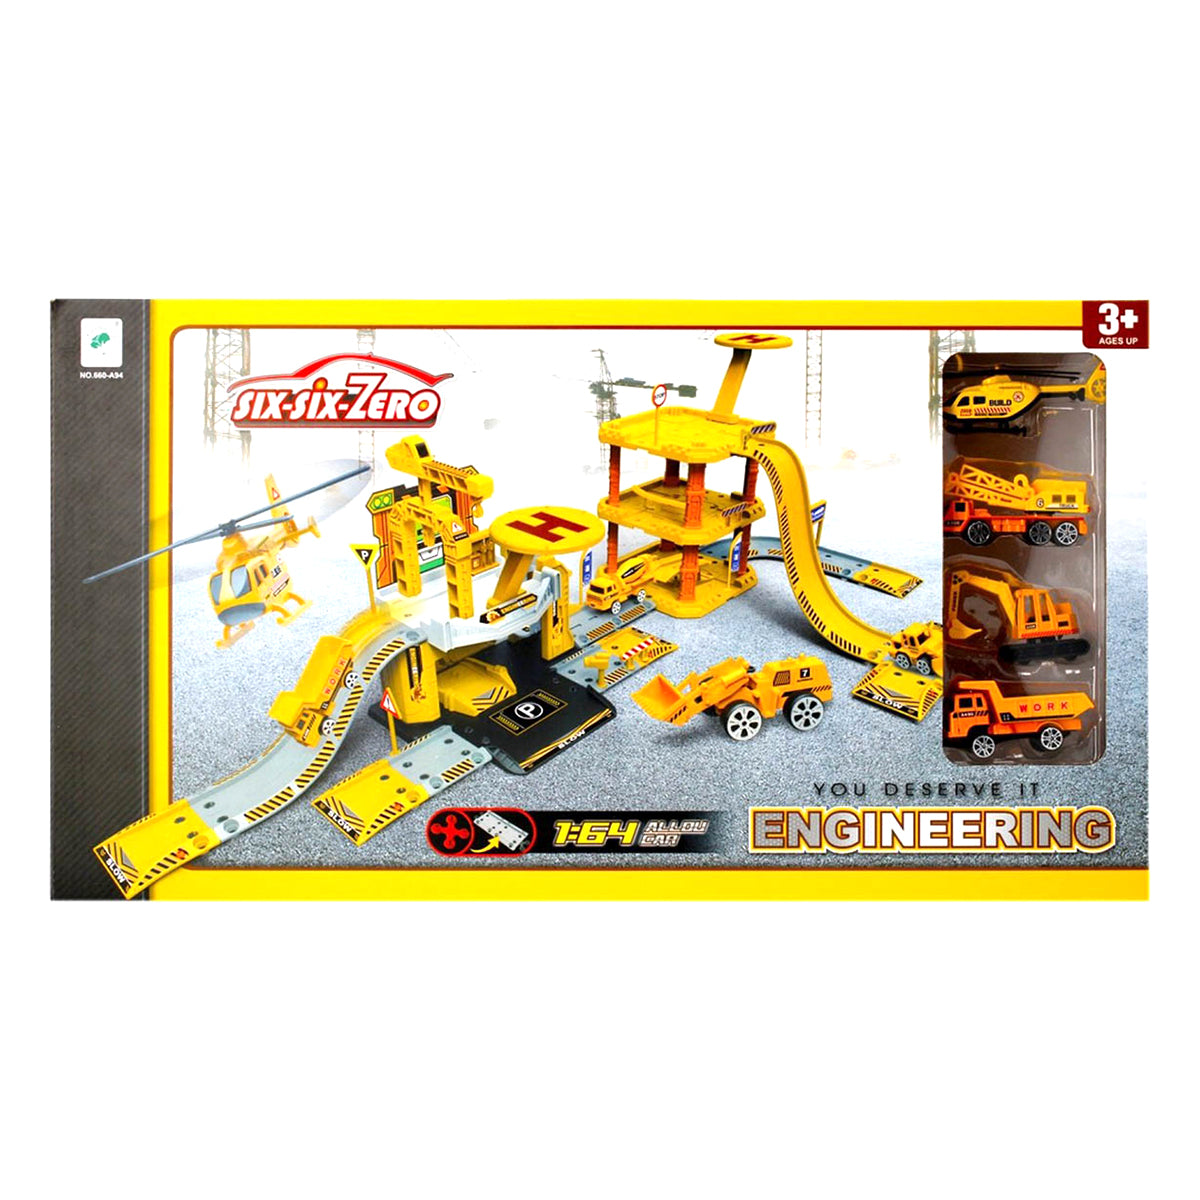 <tc>Ariko</tc> Parking garage Construction vehicle - Construction site - With excavator, box truck, helicopter, crane and gas station - 1:64 -